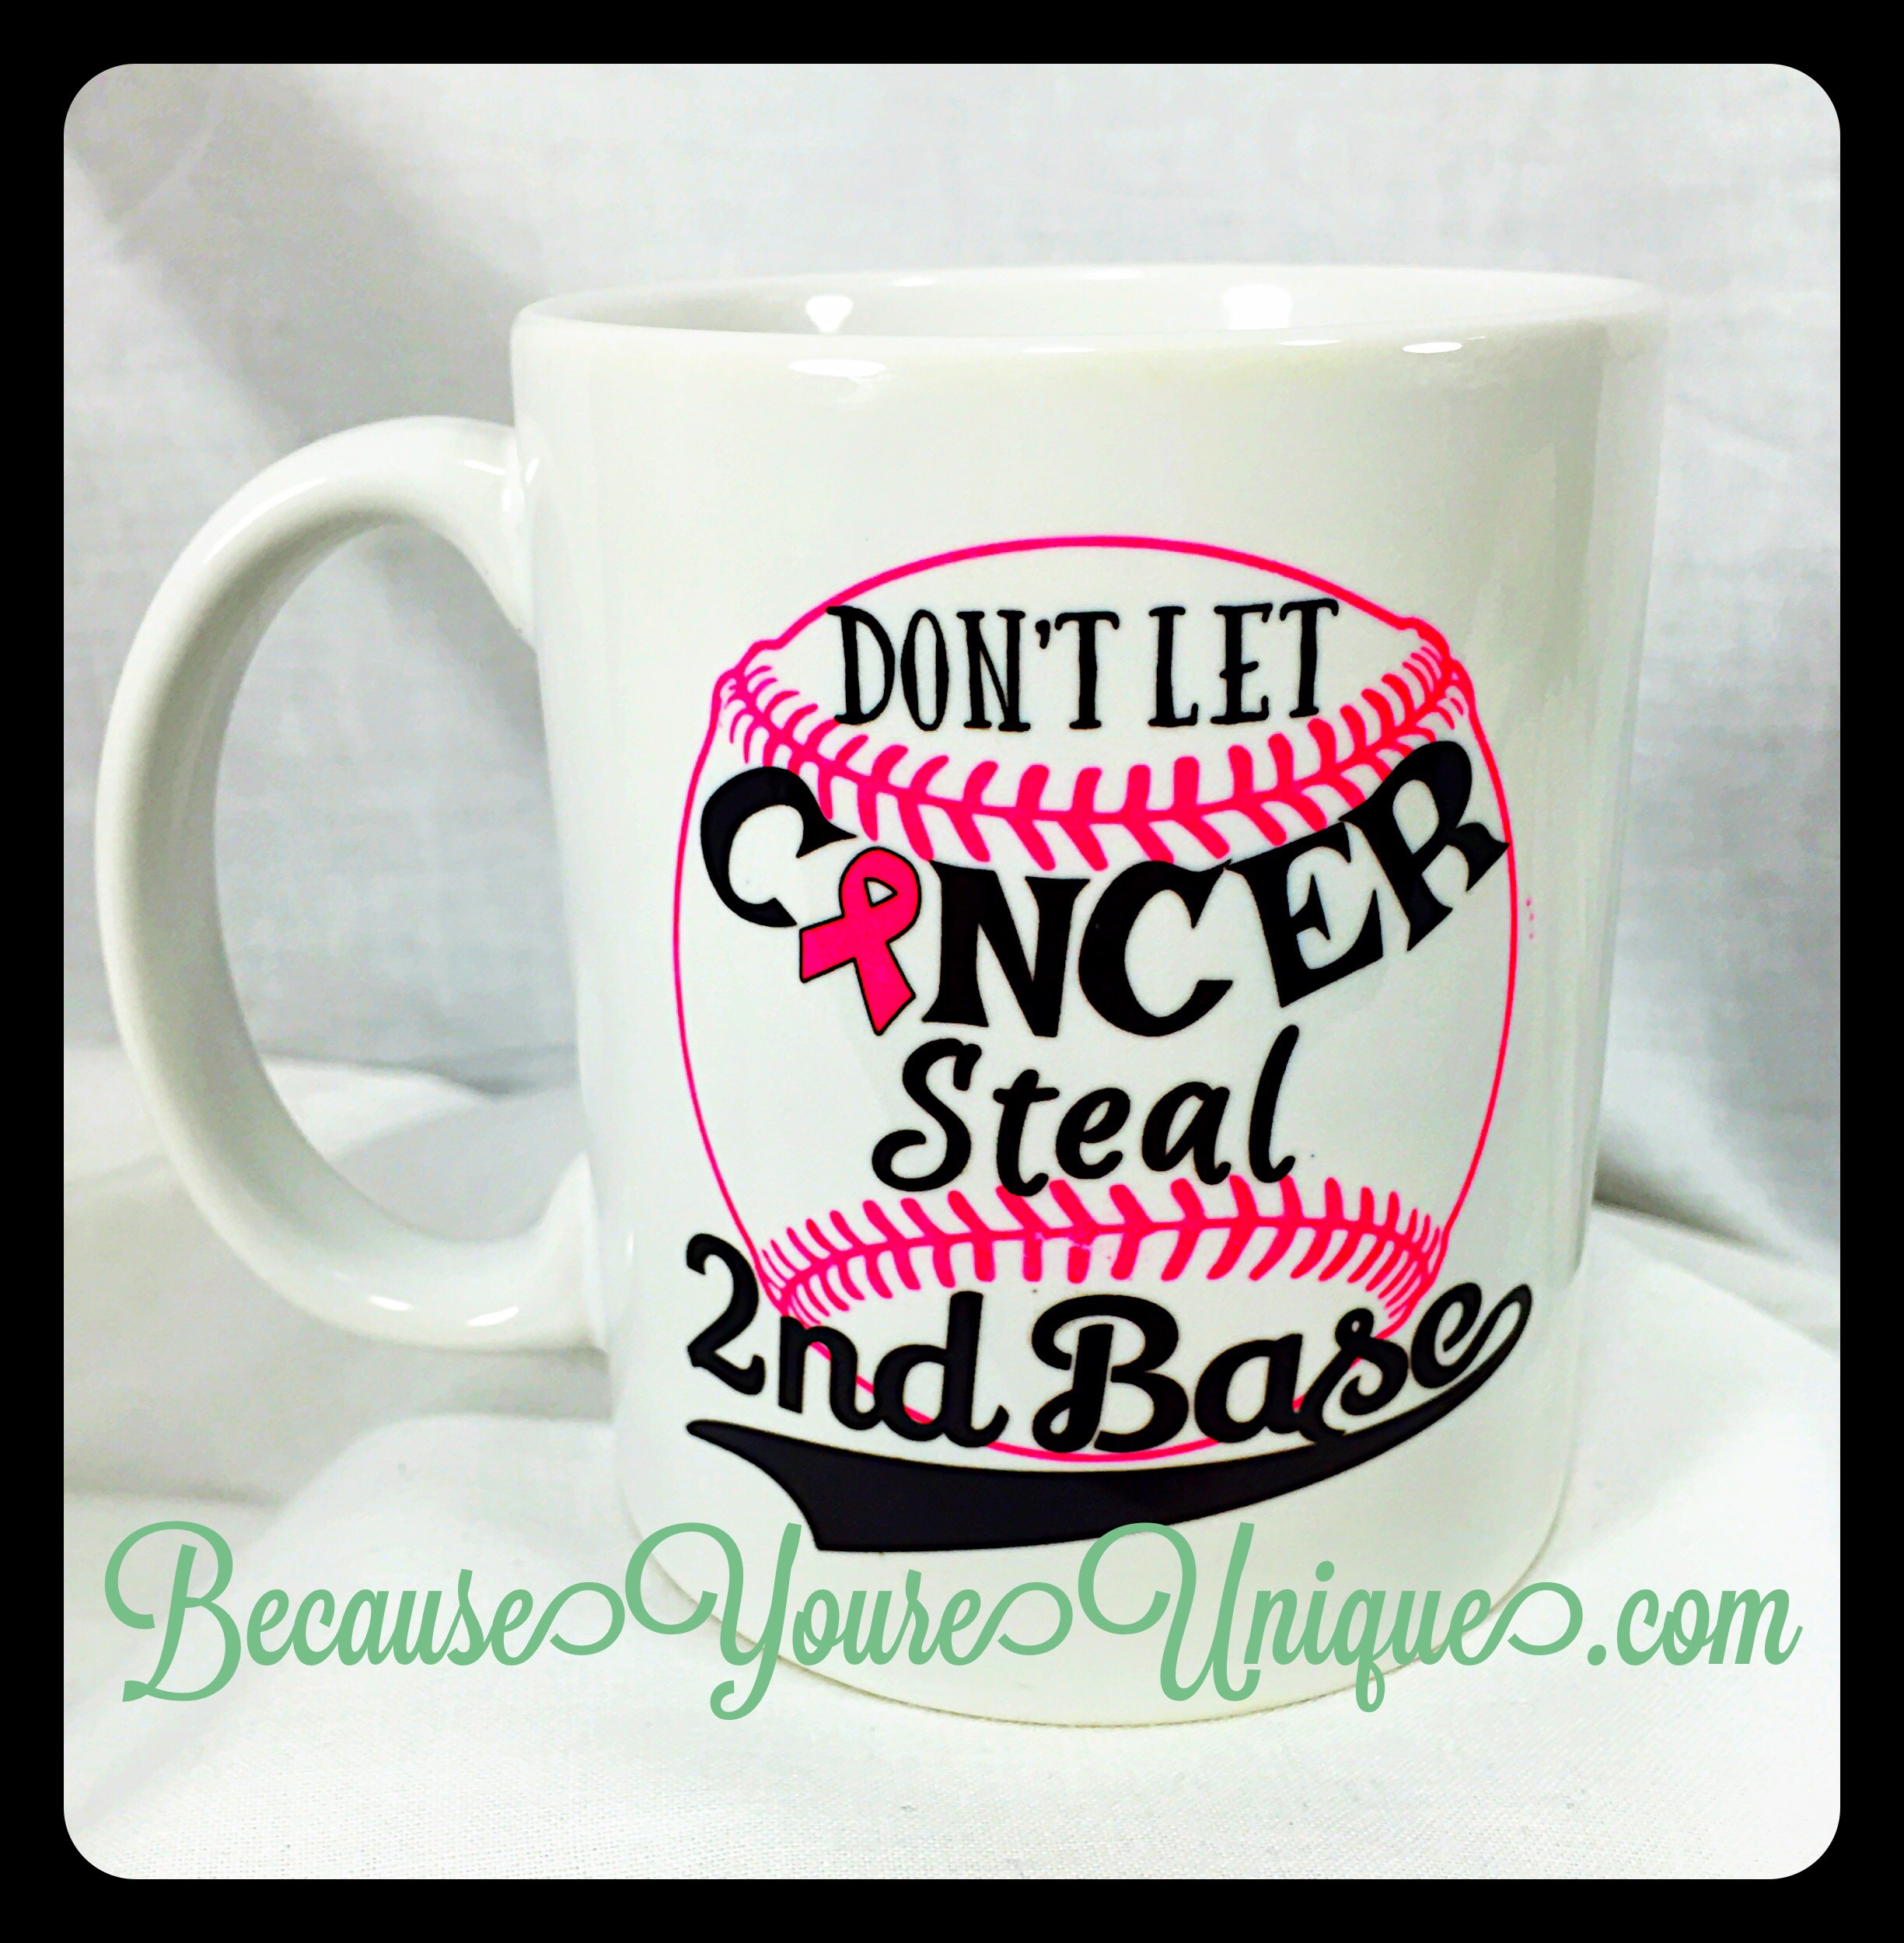 Don't let cancer steal 2nd Base made with sublimation printing